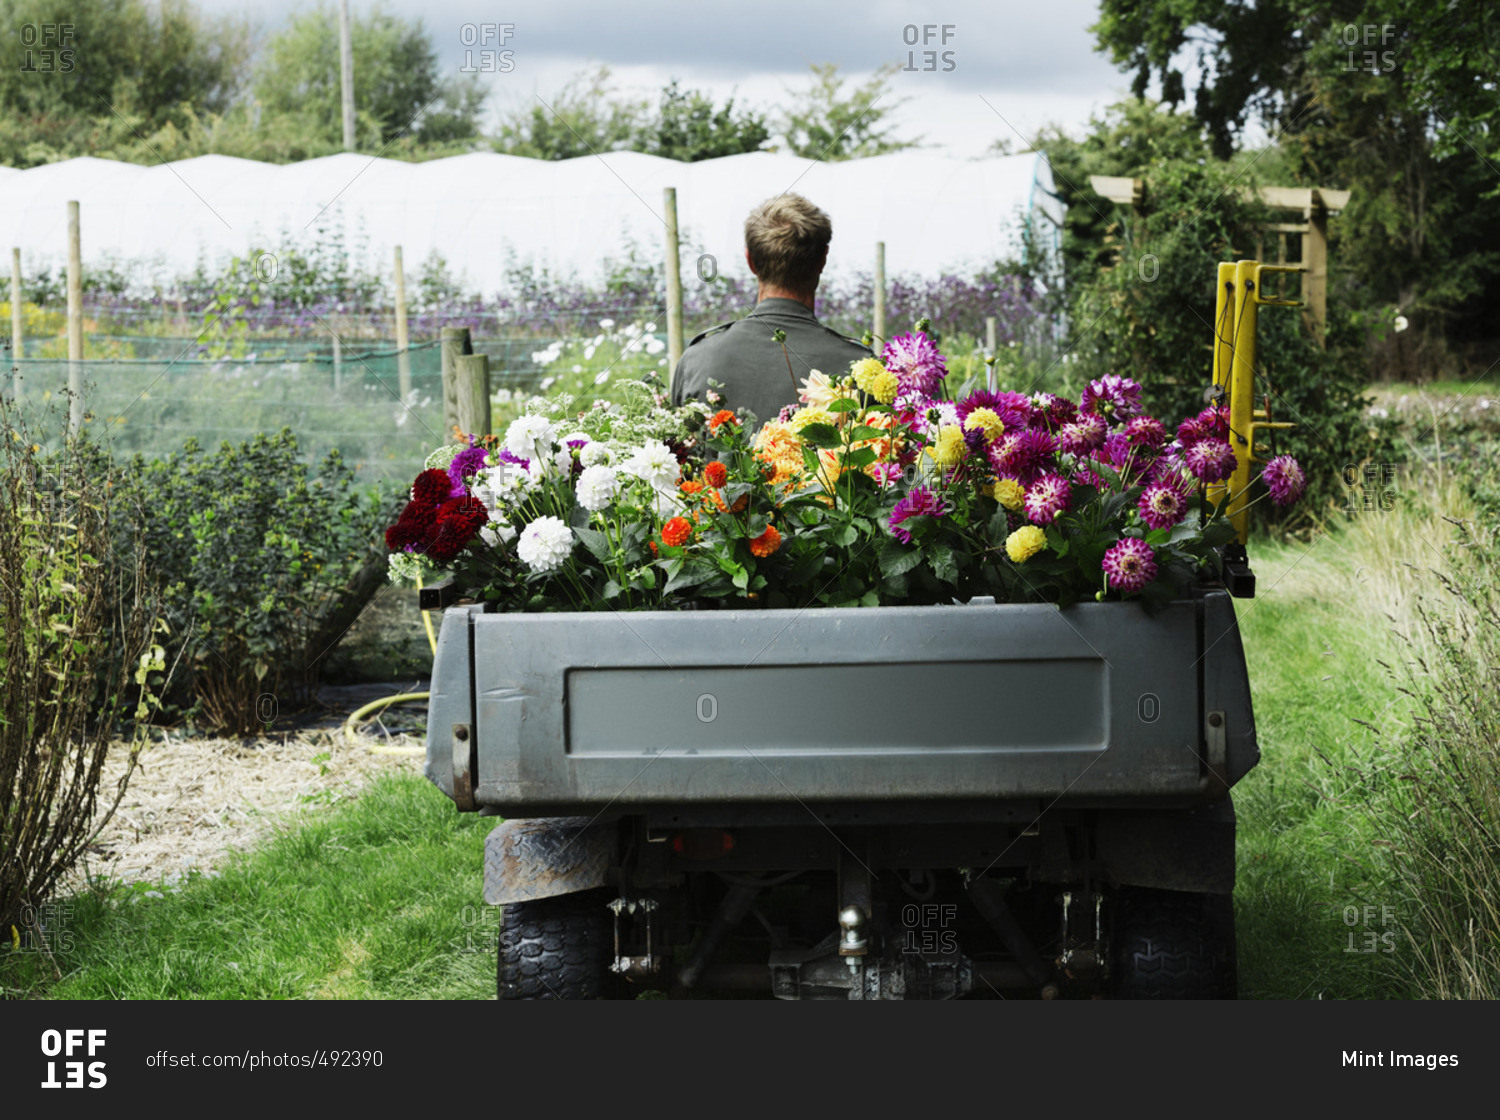 A man driving a small garden vehicle along the path between flowerbeds, loaded with cut flowers